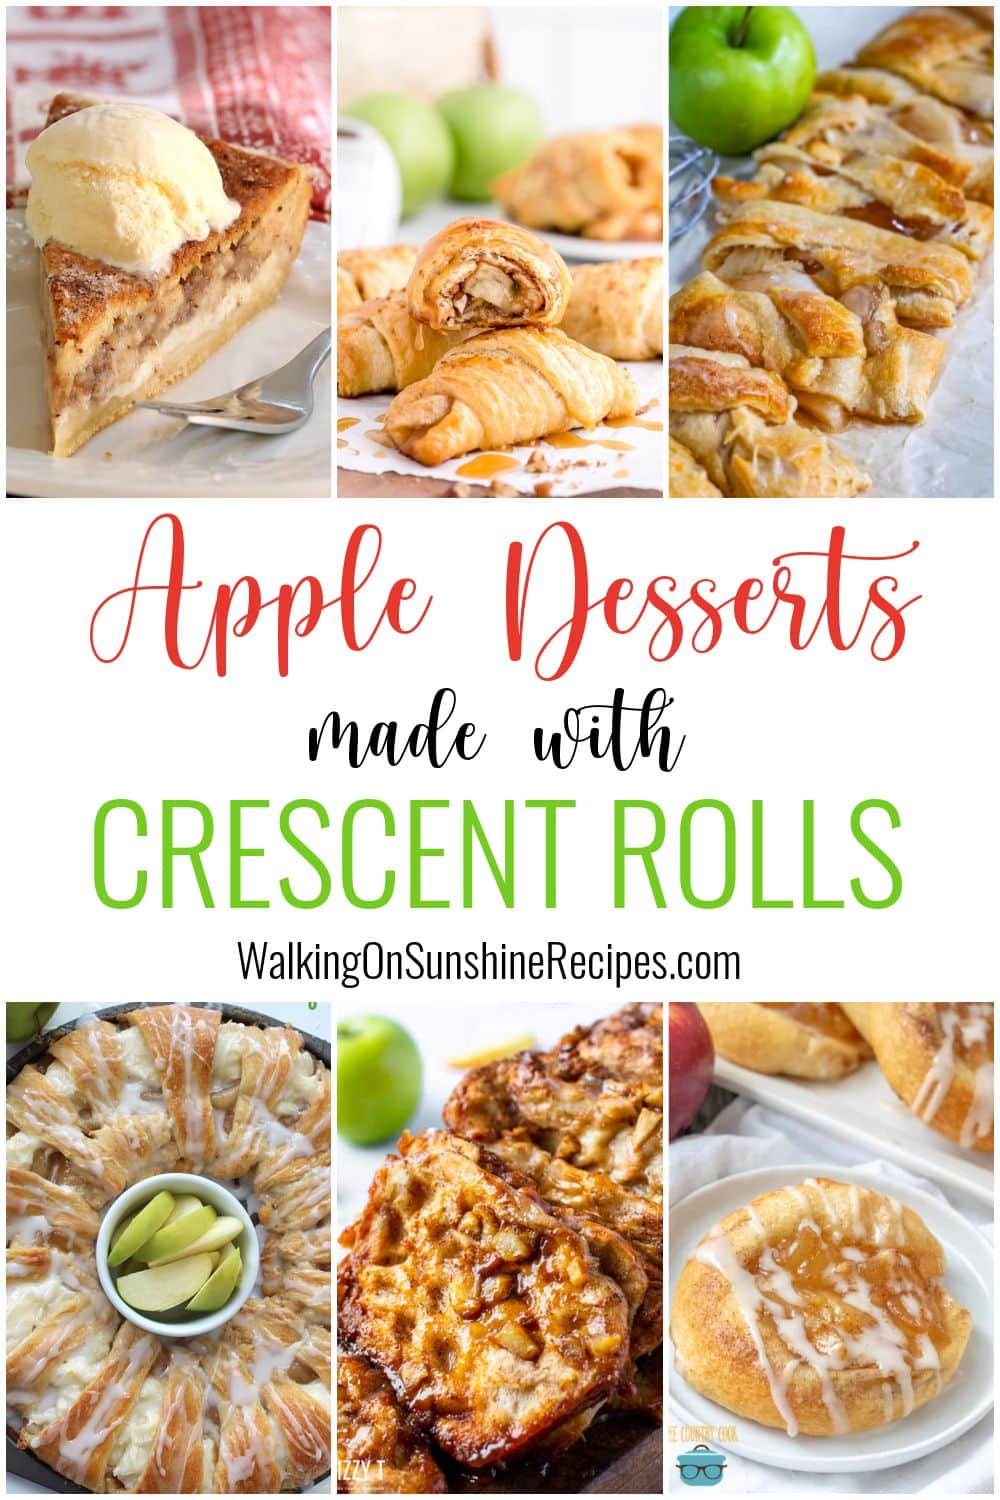 15 different Apple desserts made with crescent rolls.